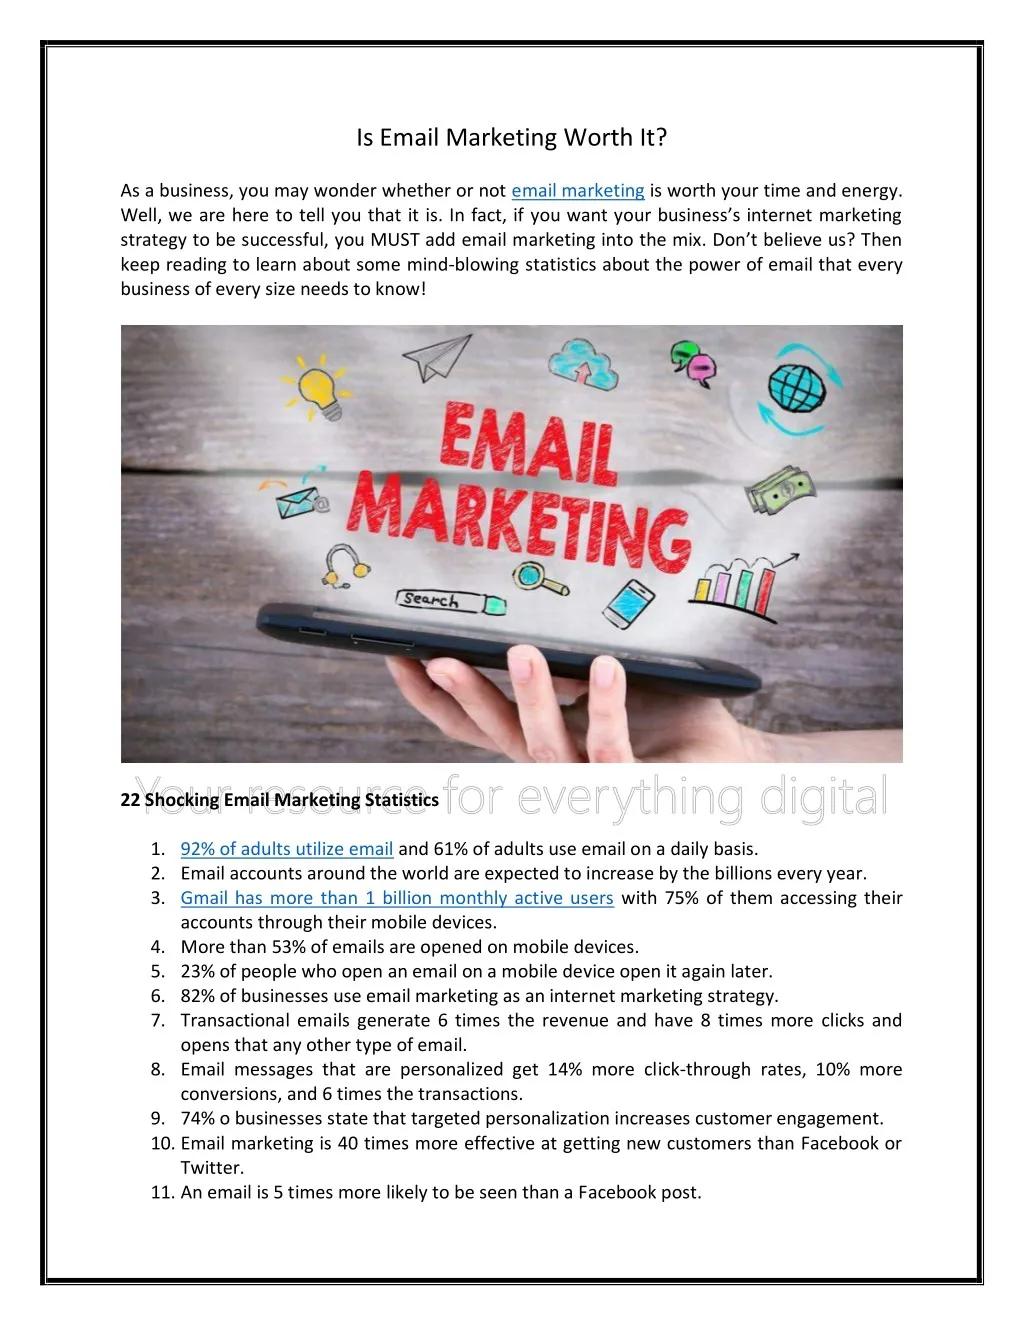 is email marketing worth it